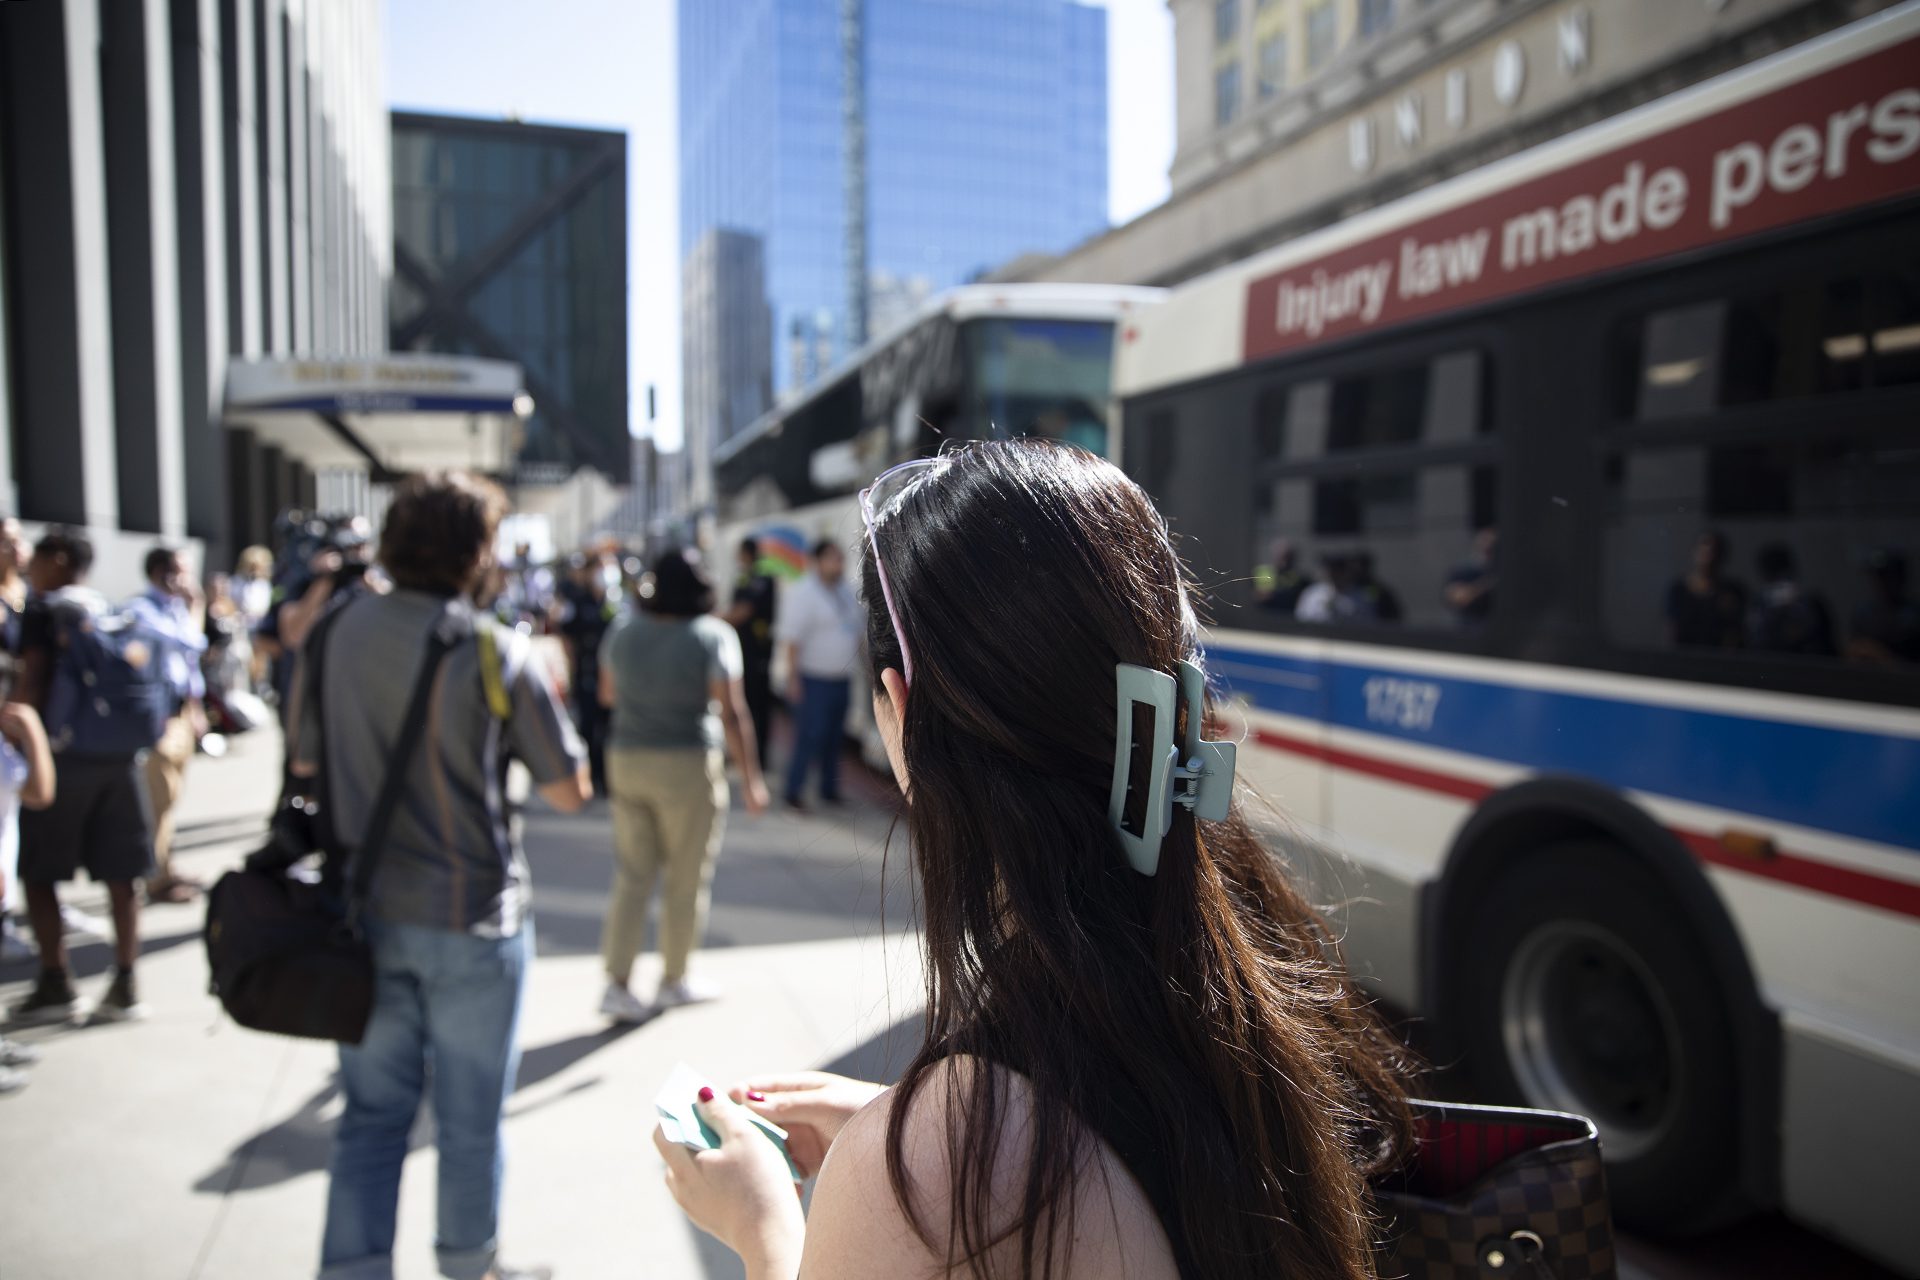 buses lined up outside Union station and migrants transferring from one to another blurry in the background; in the foreground Diane looking on with business cards in her hands